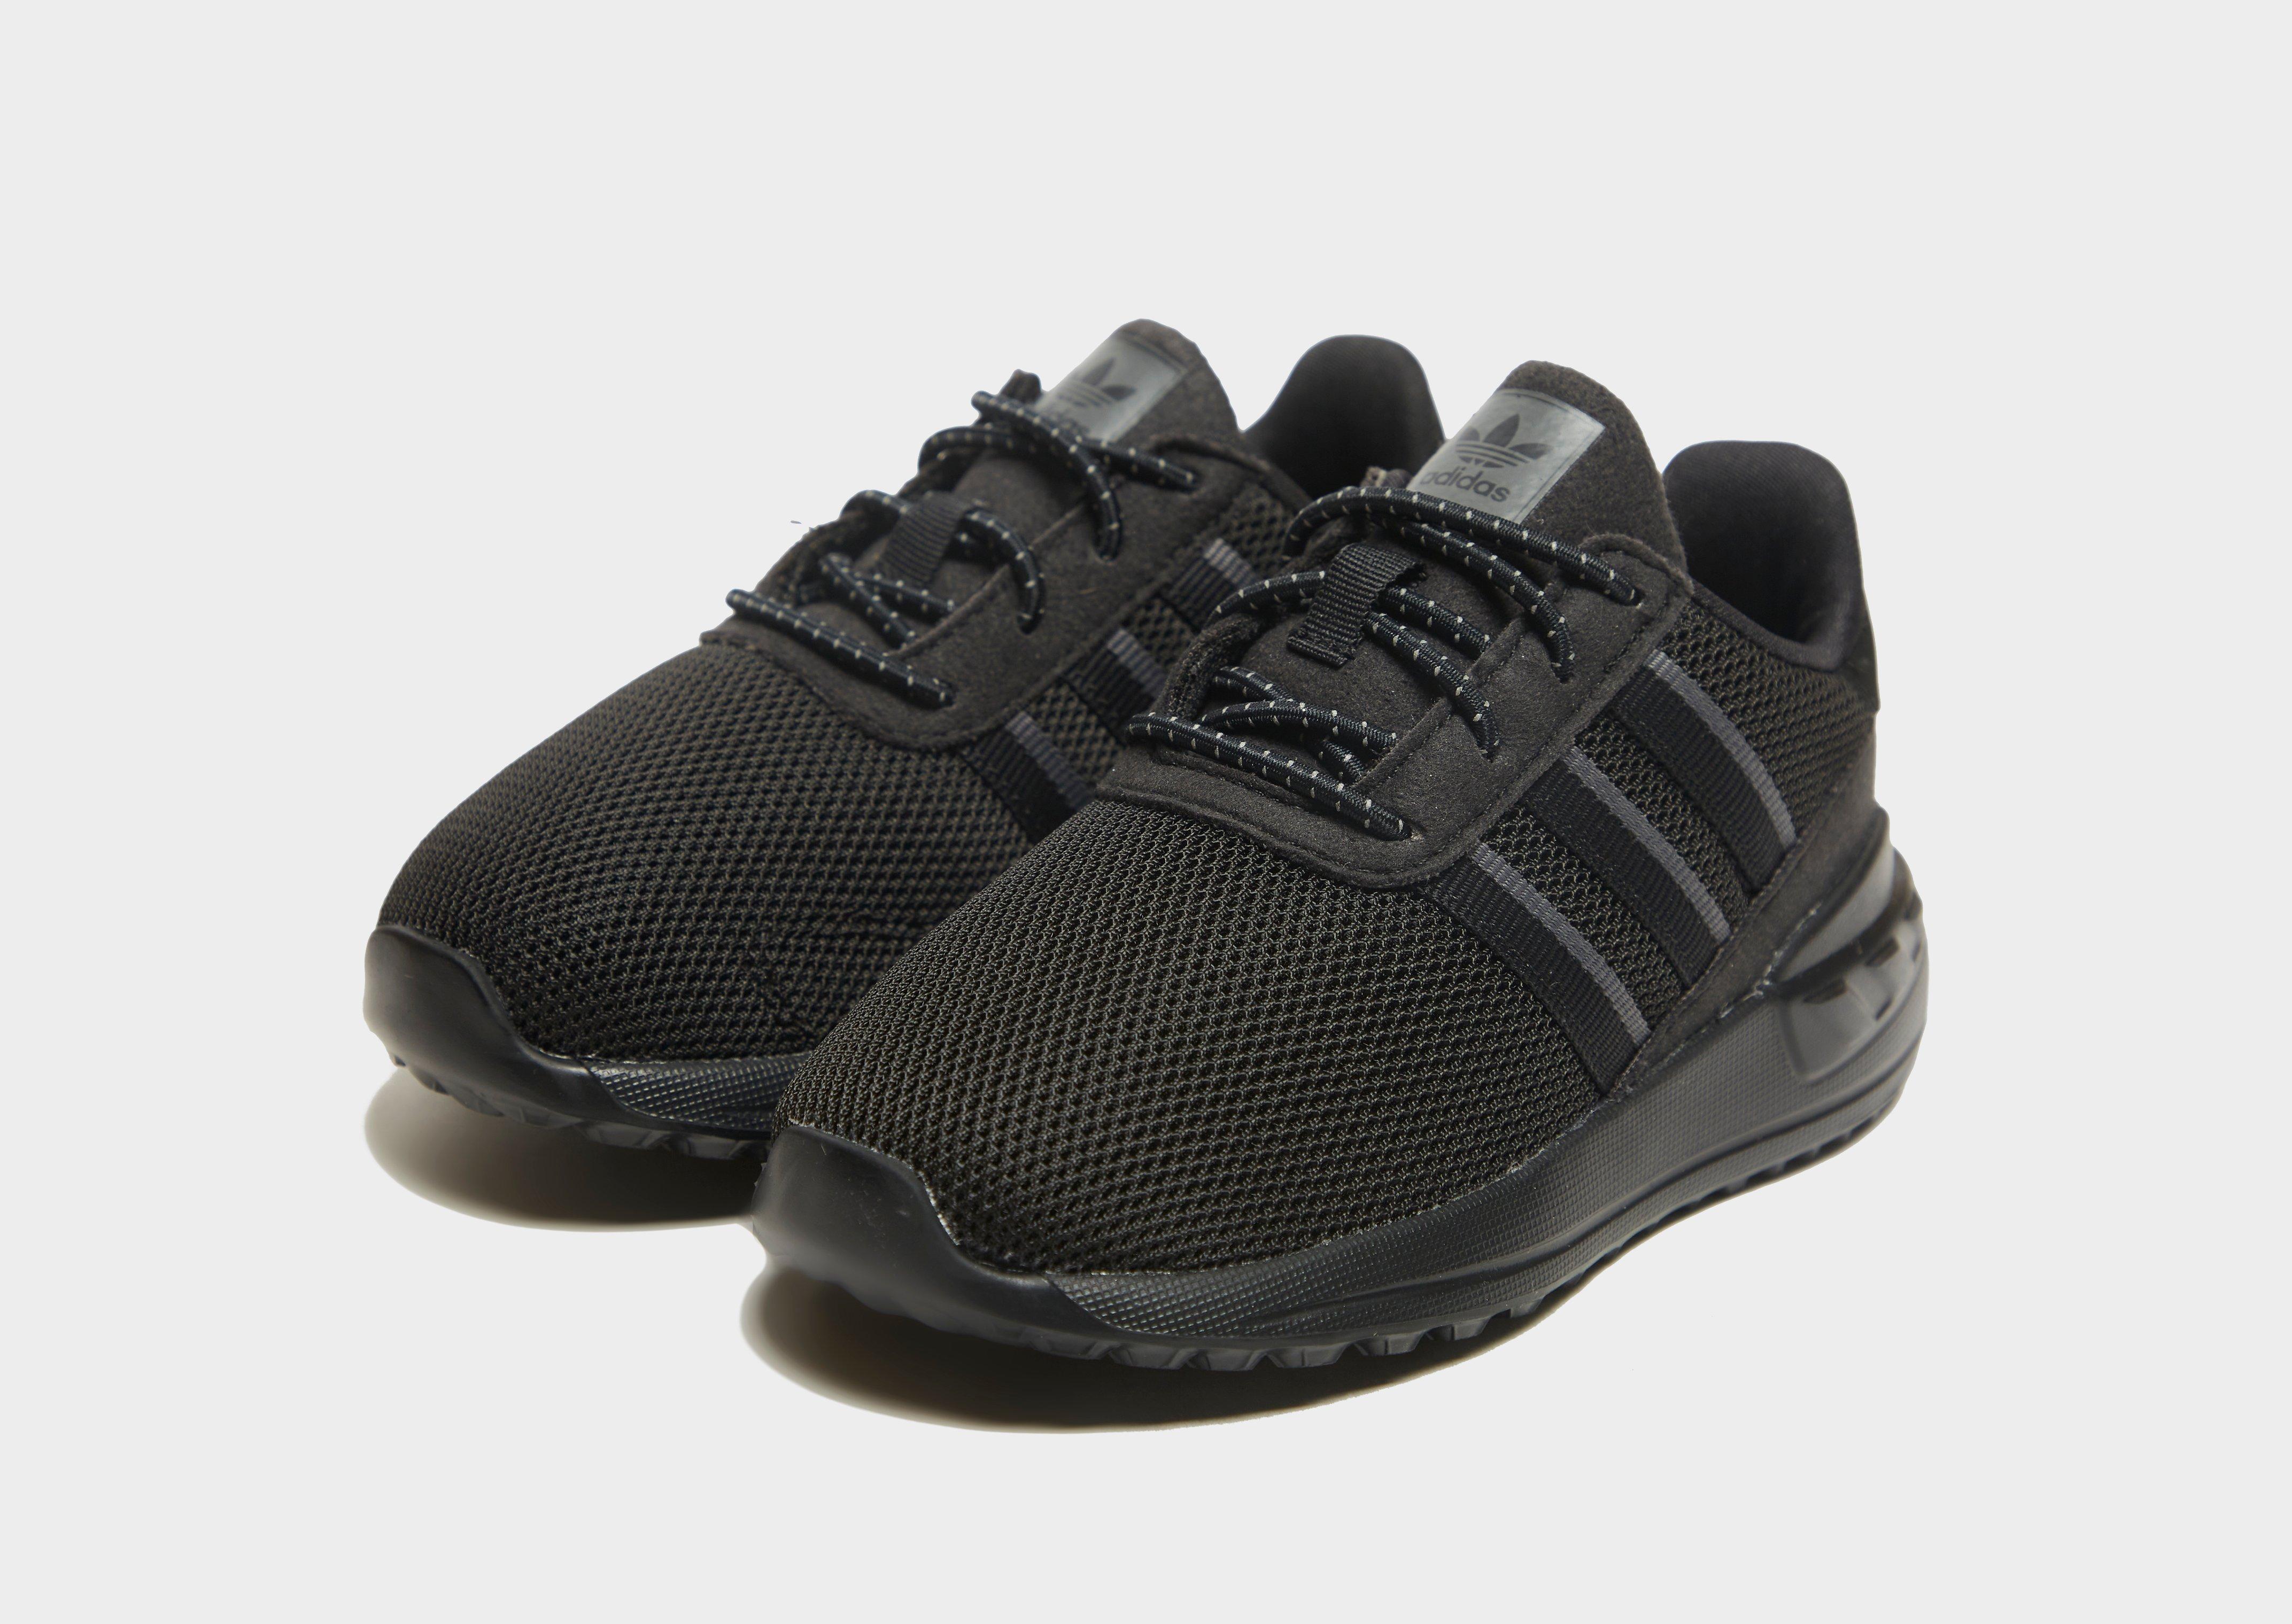 infant adidas trainers sale